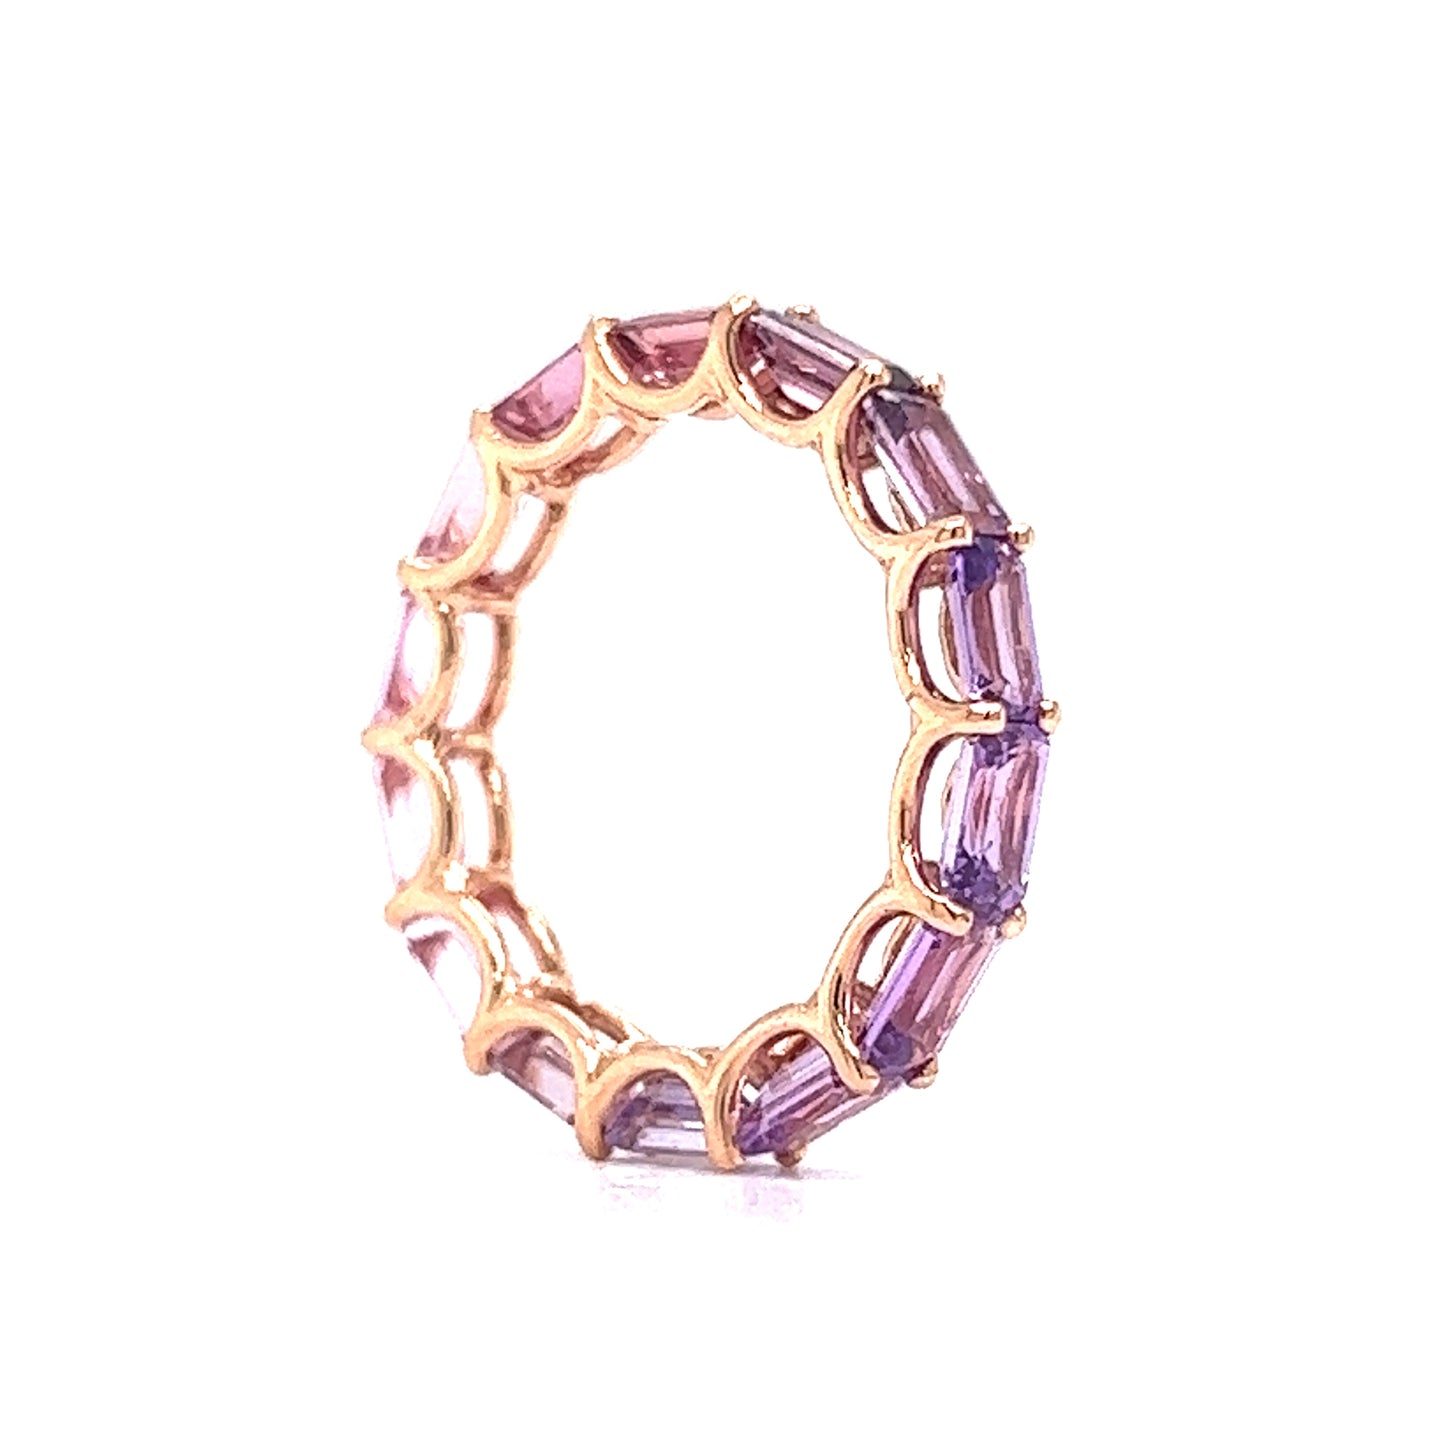 3.36 Pink & Purple Sapphire Eternity Band in 14k Rose Gold